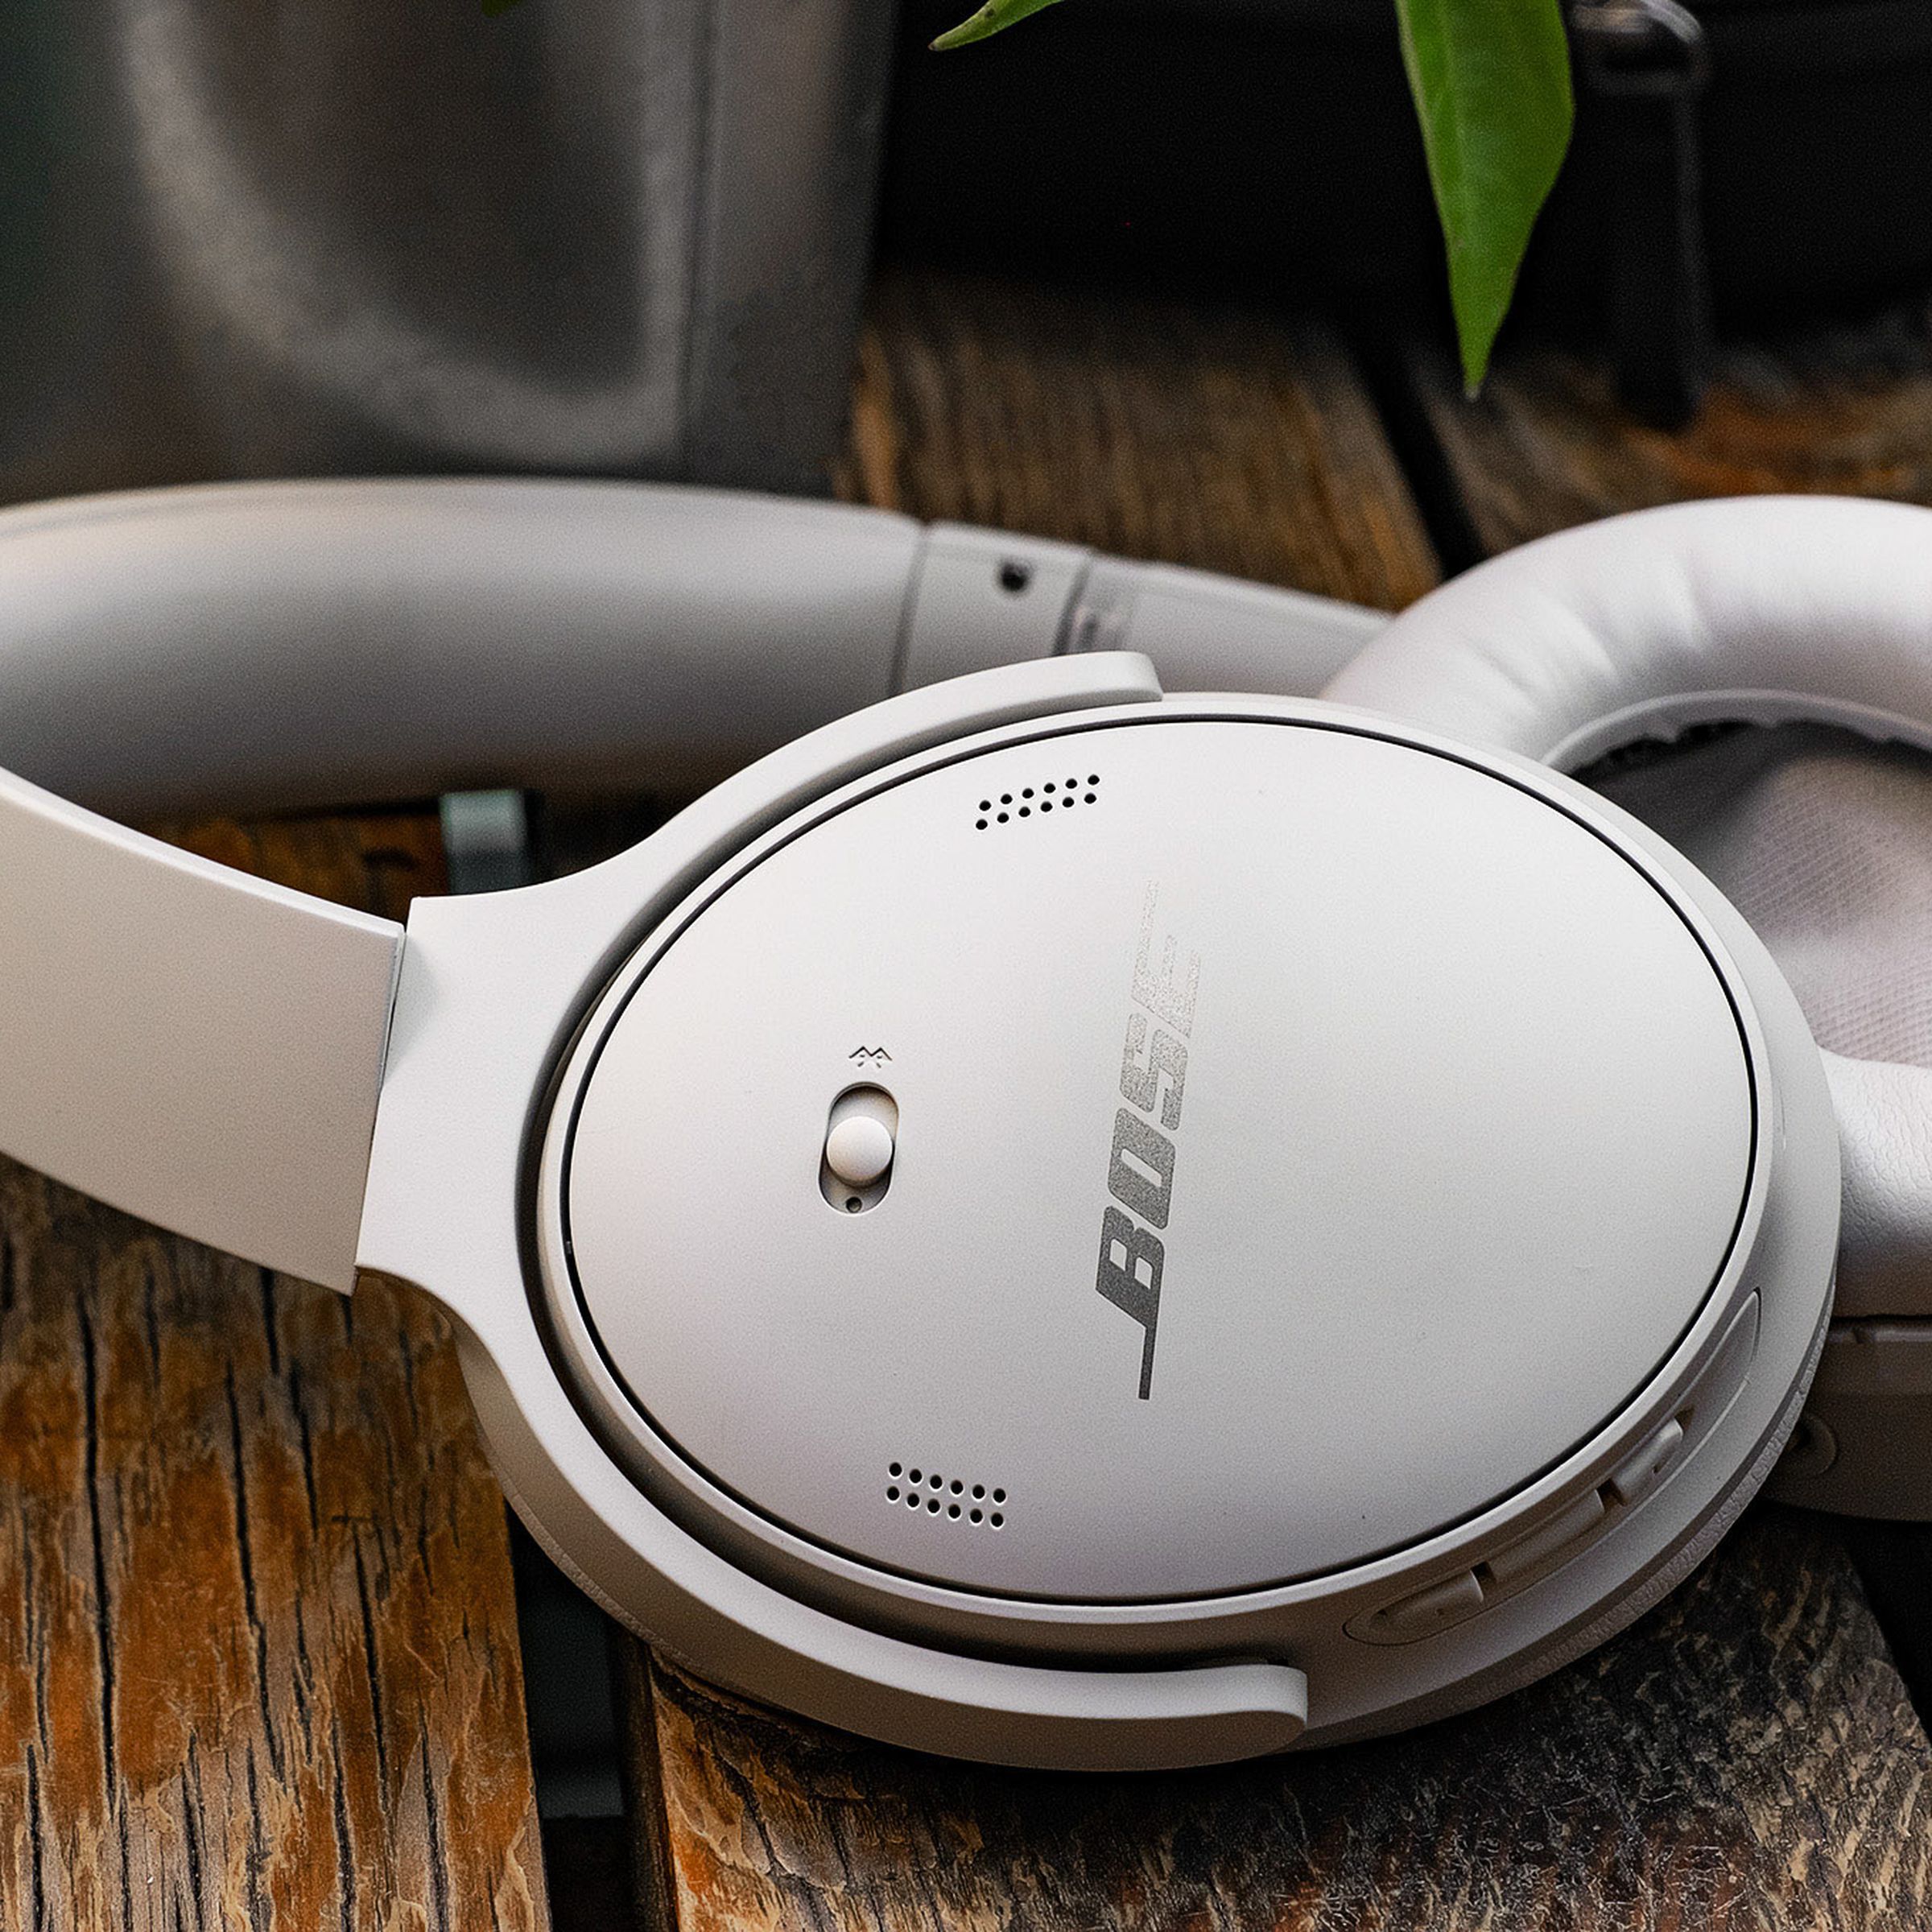 Bose’s QuietComfort 45 are the most comfortable noise-canceling headphones and are currently available at an all-time low.